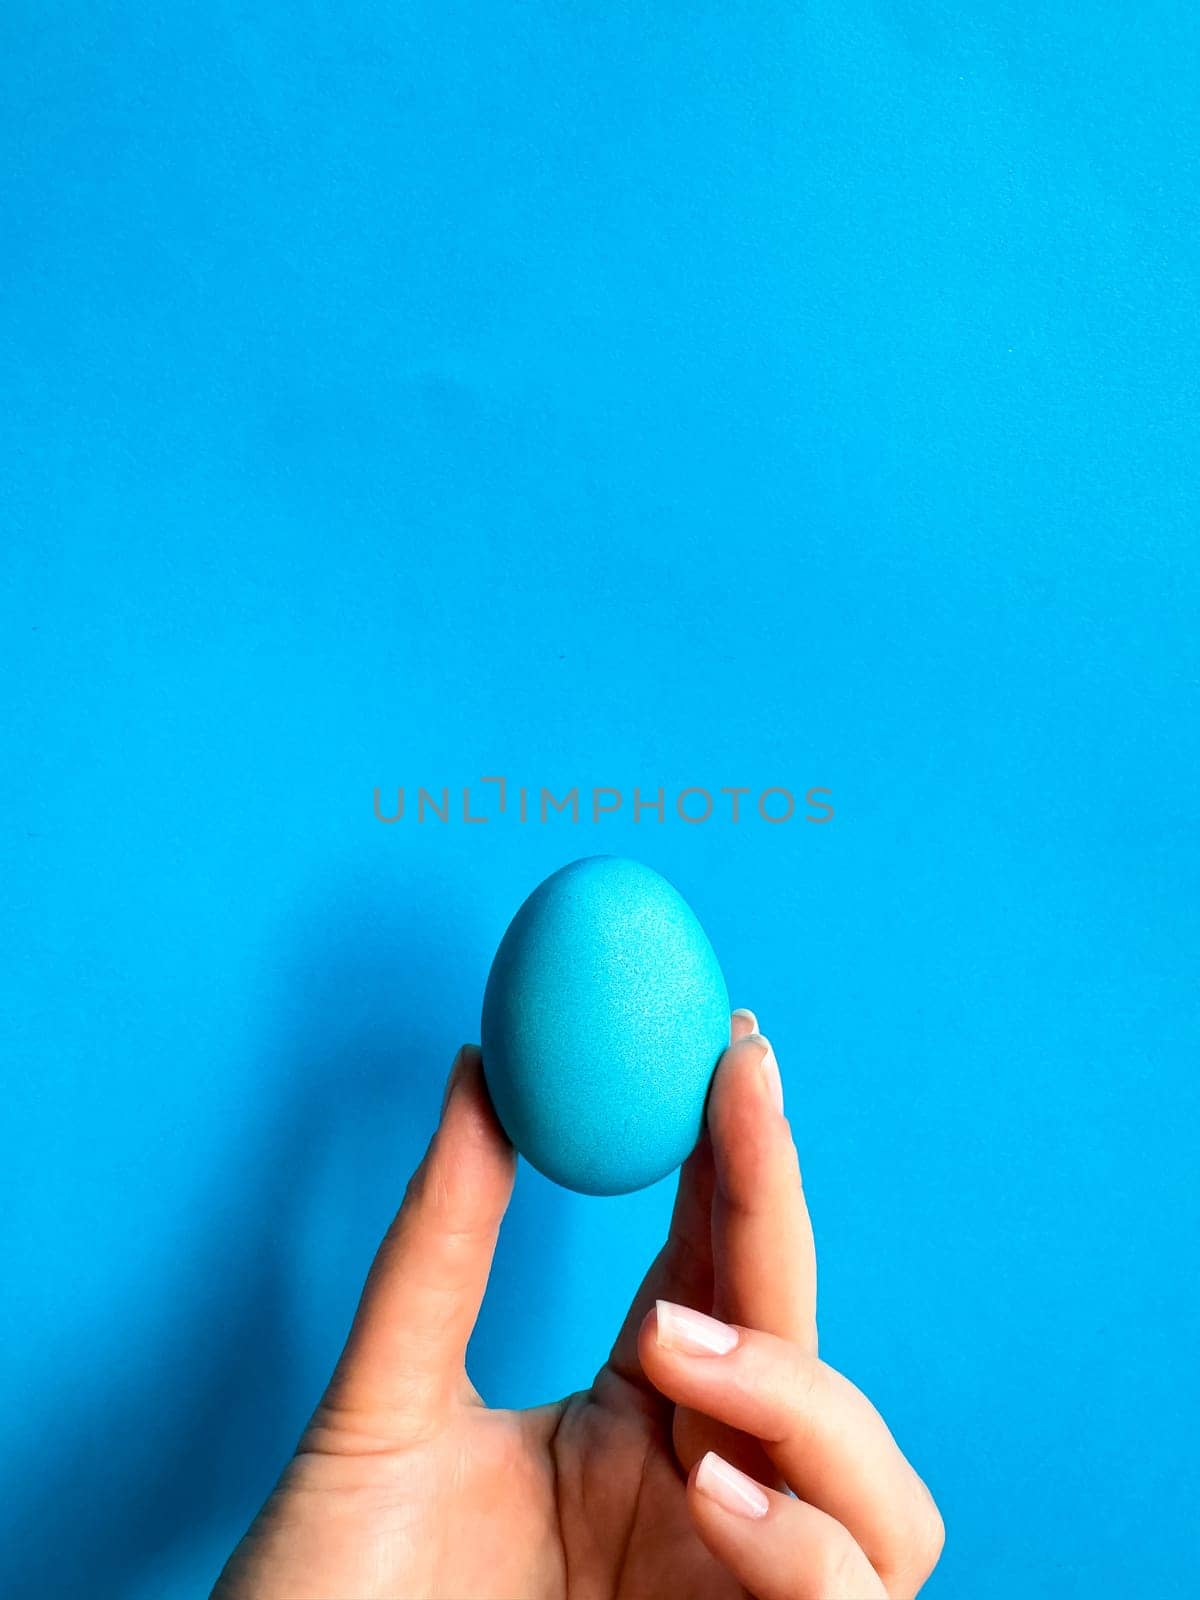 Hand balancing blue egg on a fingertip against solid blue background, minimalist concept for balance, Easter, and simplicity with space for text. by Lunnica